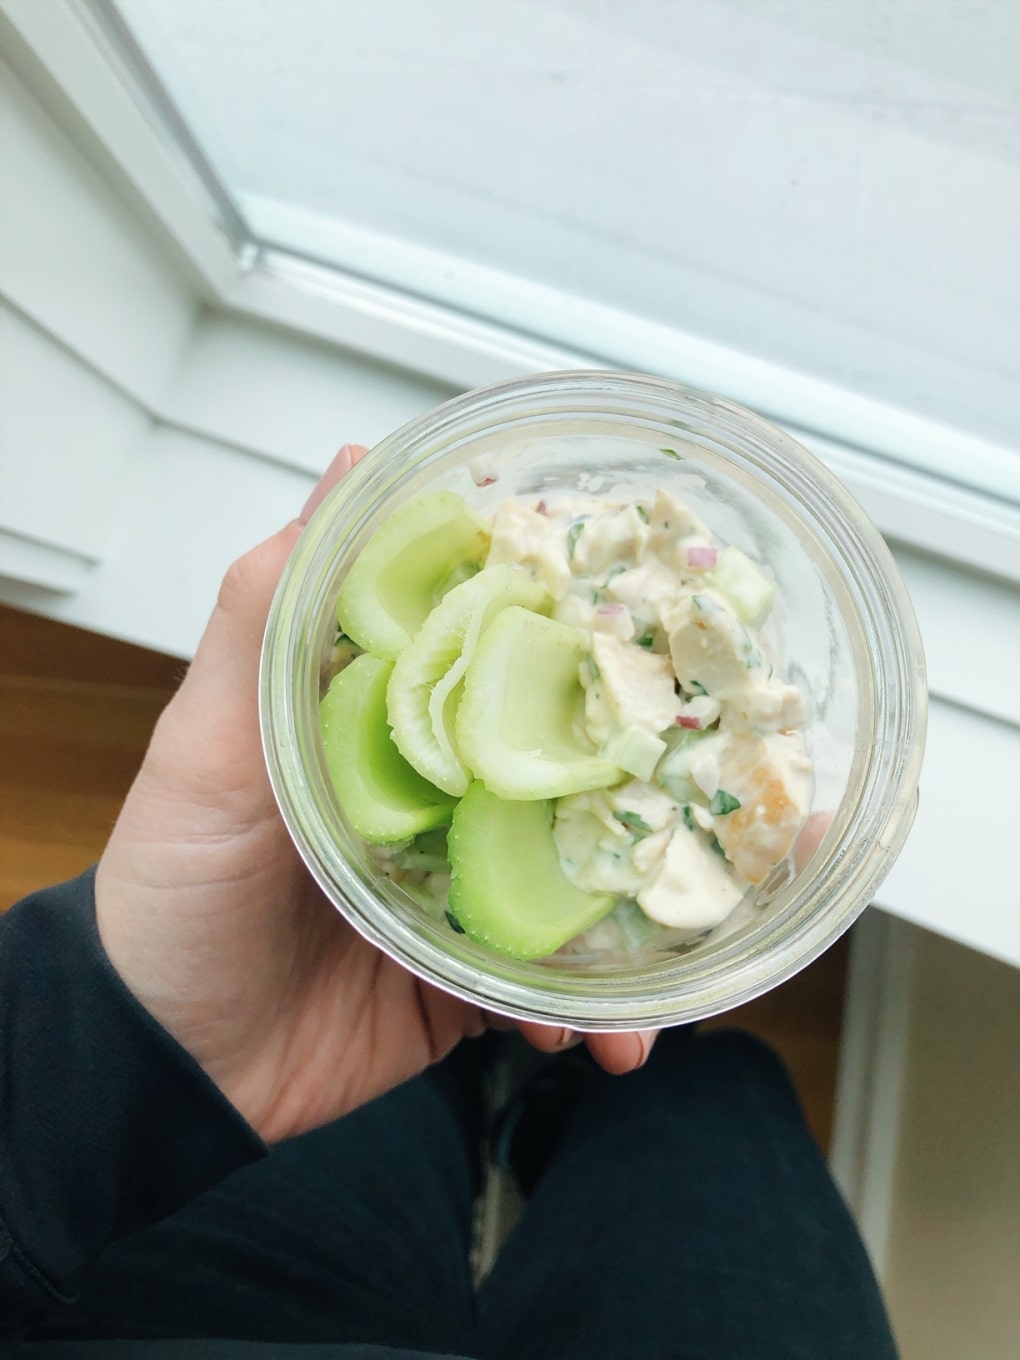 Chicken salad in a glass jar with celery sticks being held next to a window